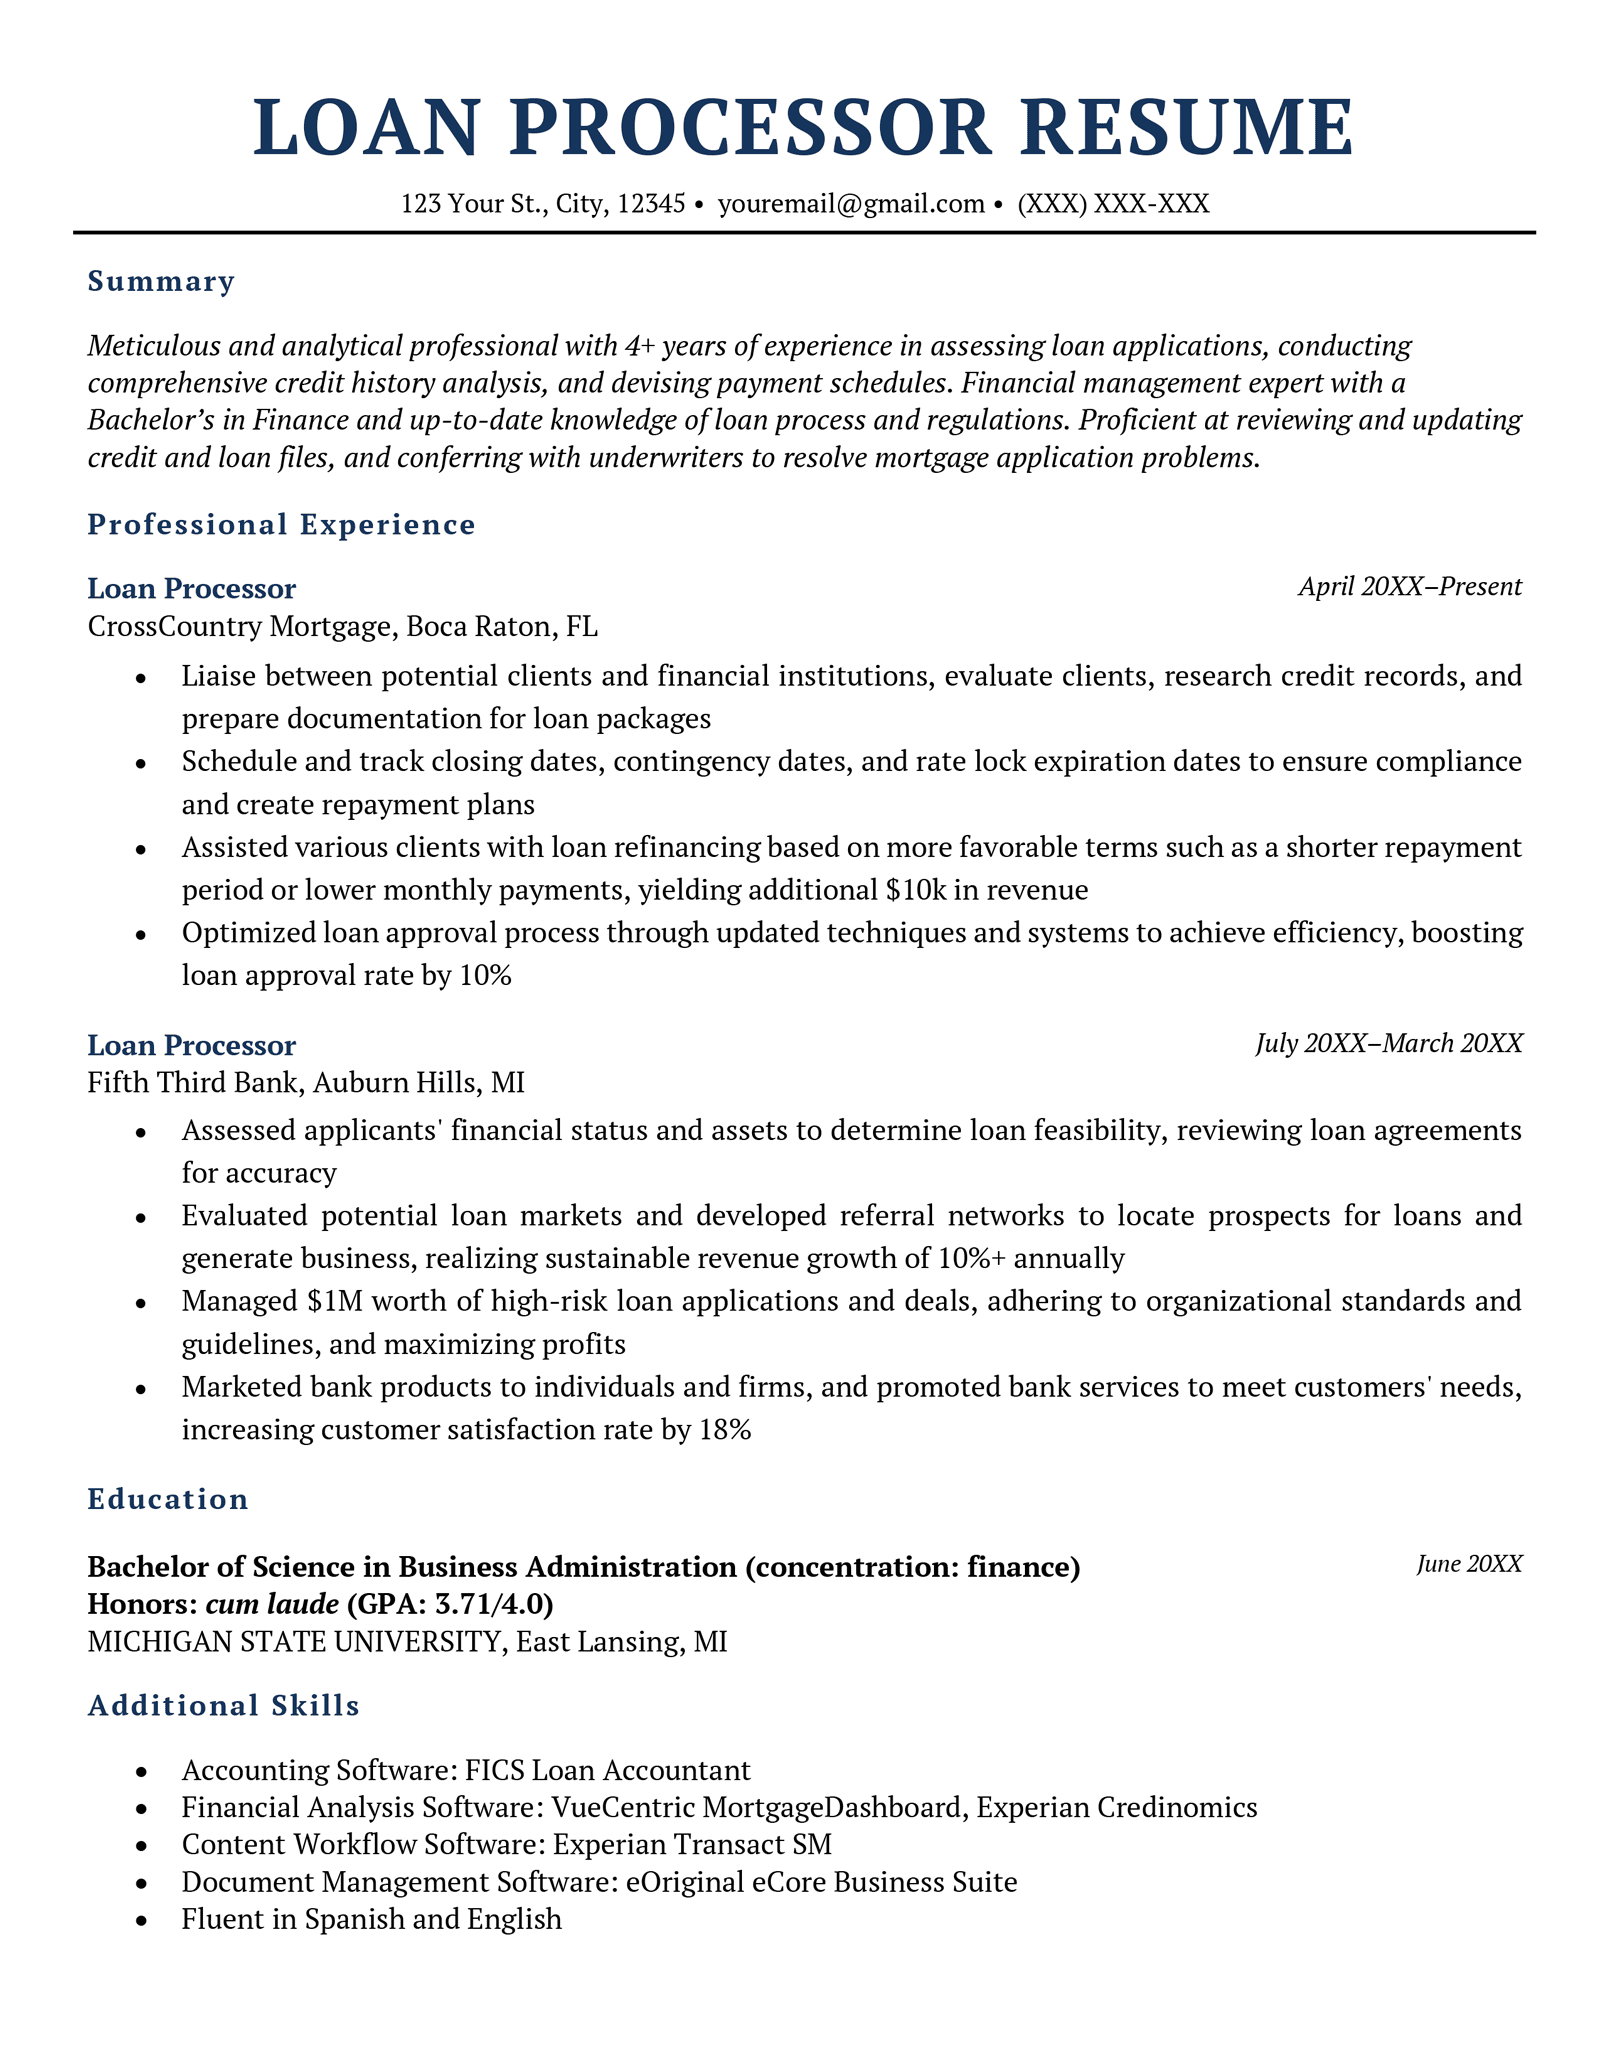 Loan processor resume example with dark blue font